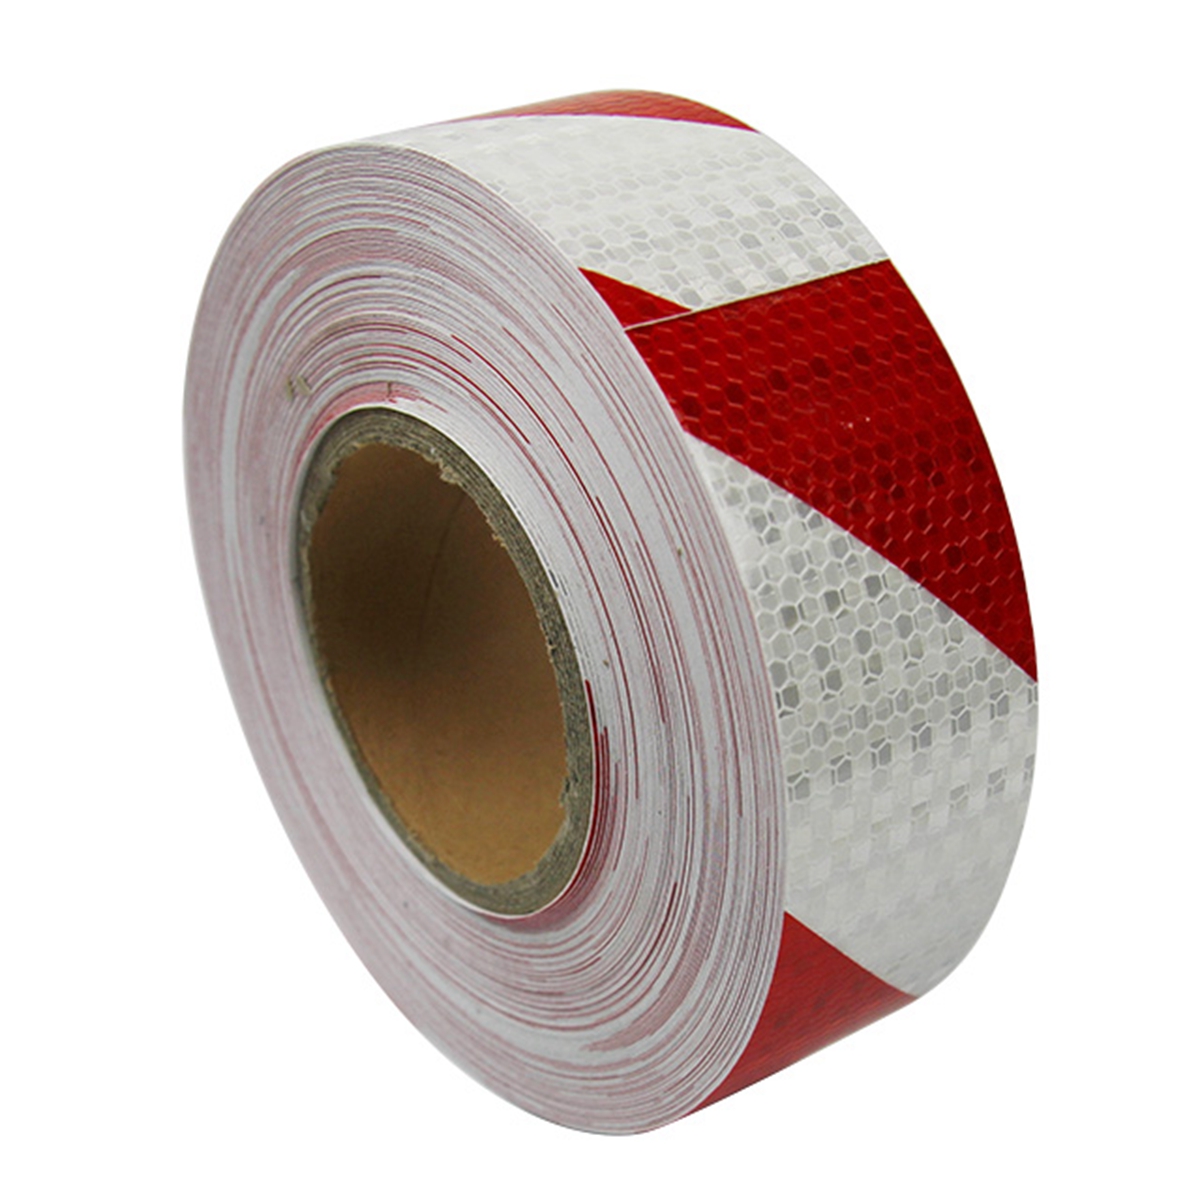 Hot Sale Customize Printed Signal Adhesion Safety Flagging Barrier PVC Reflective Warning Tape